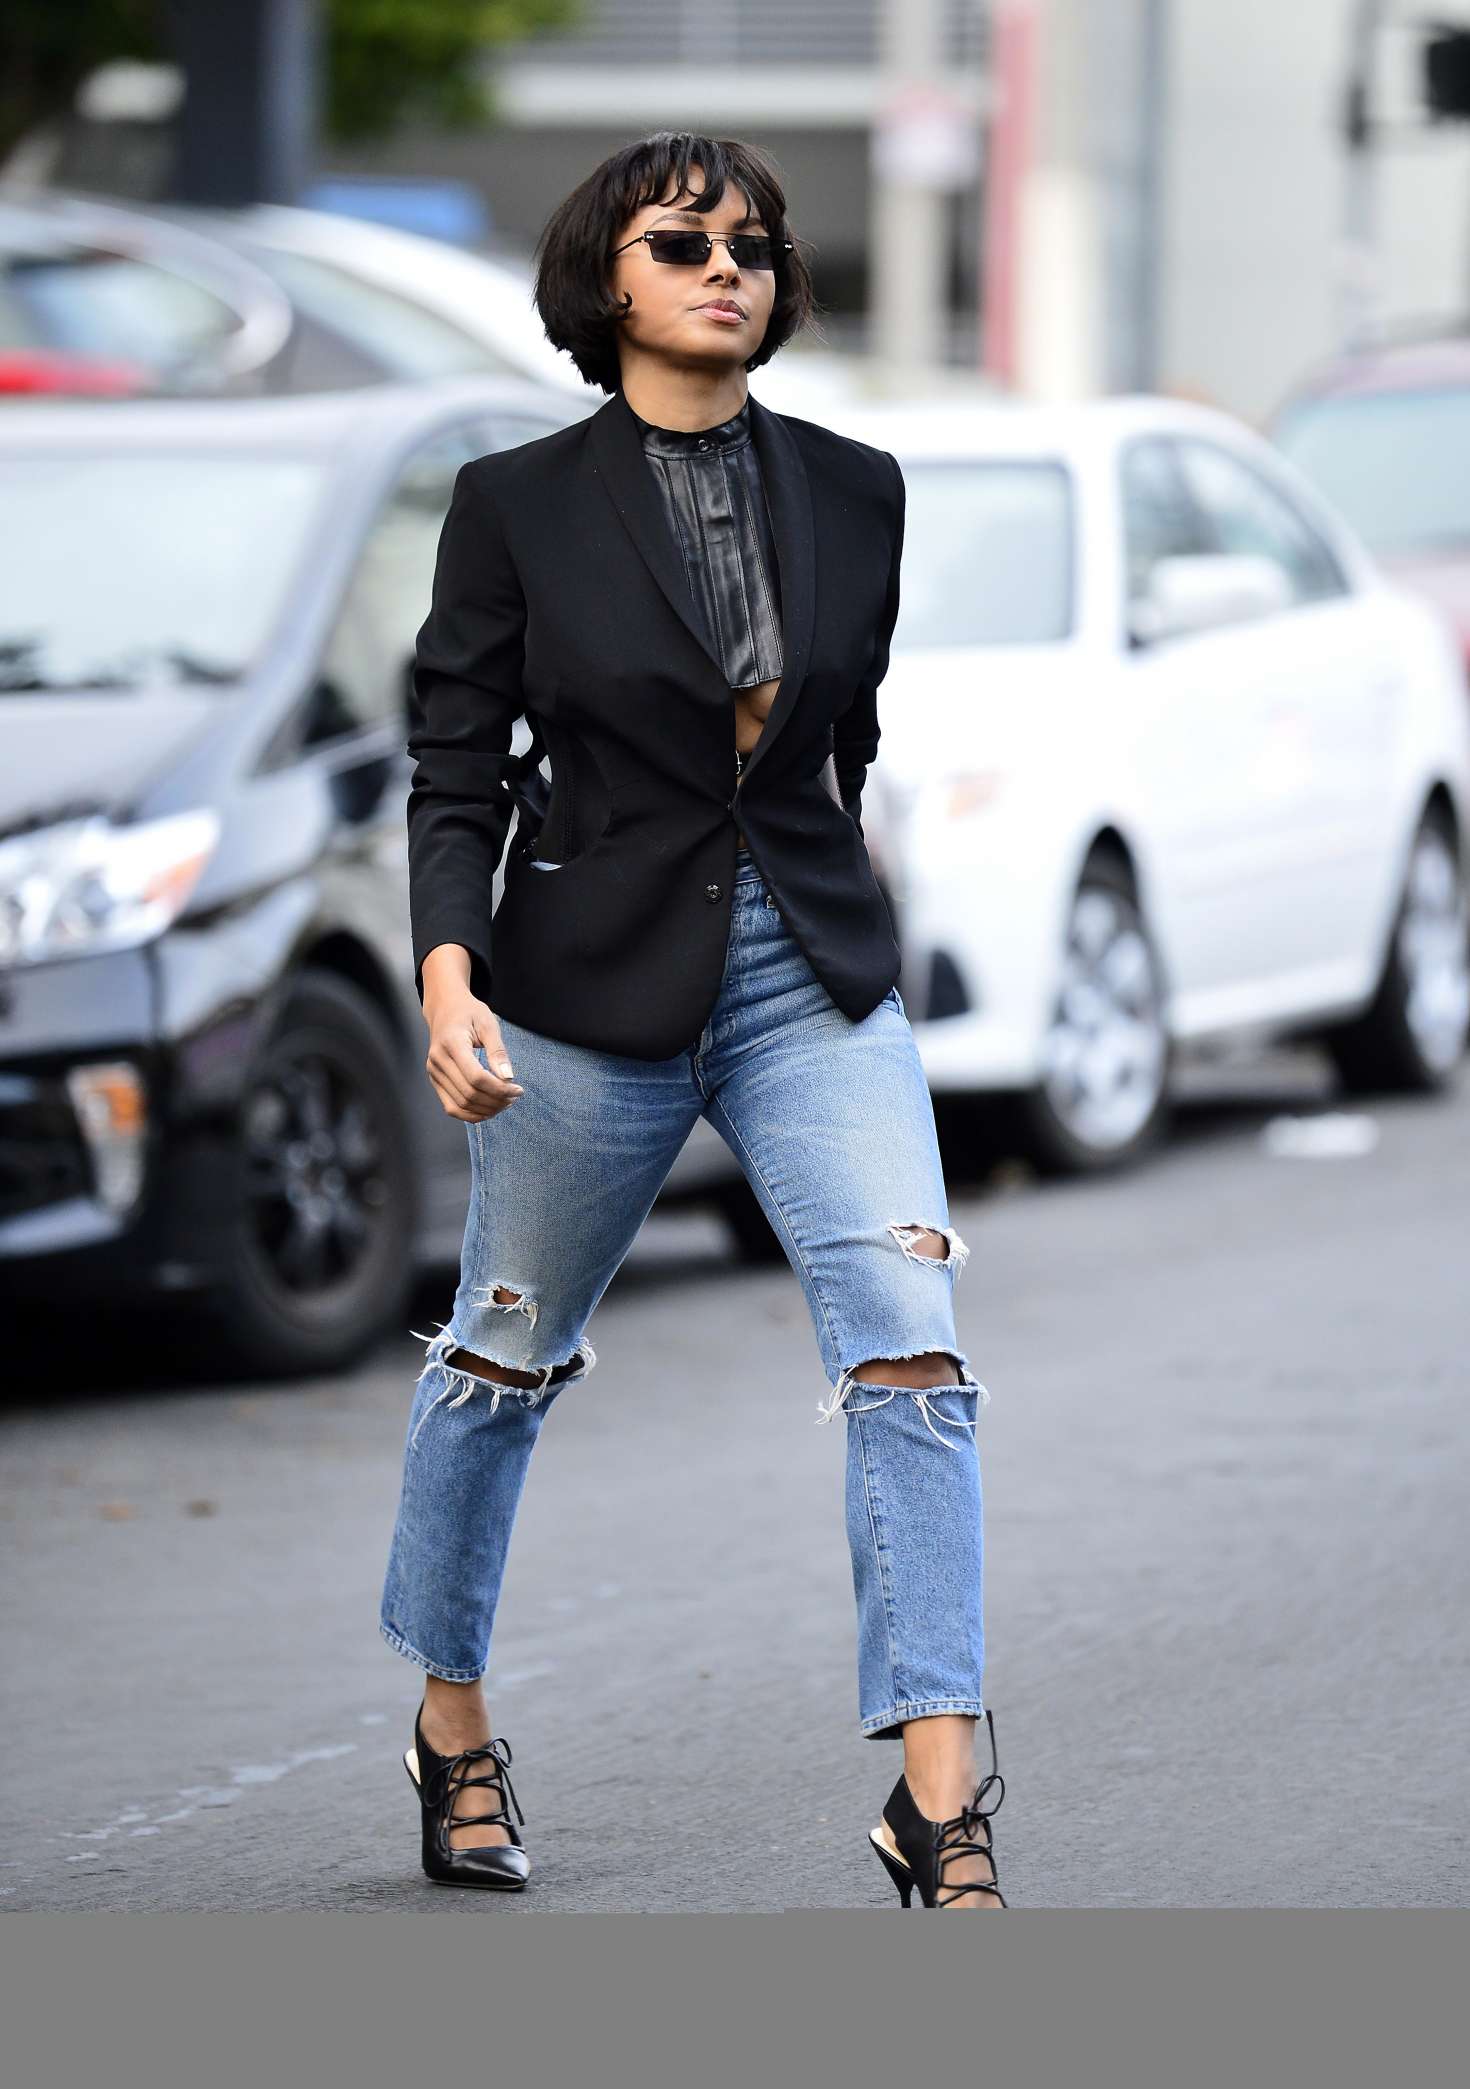 Kat Graham in Ripped Jeans -02 | GotCeleb